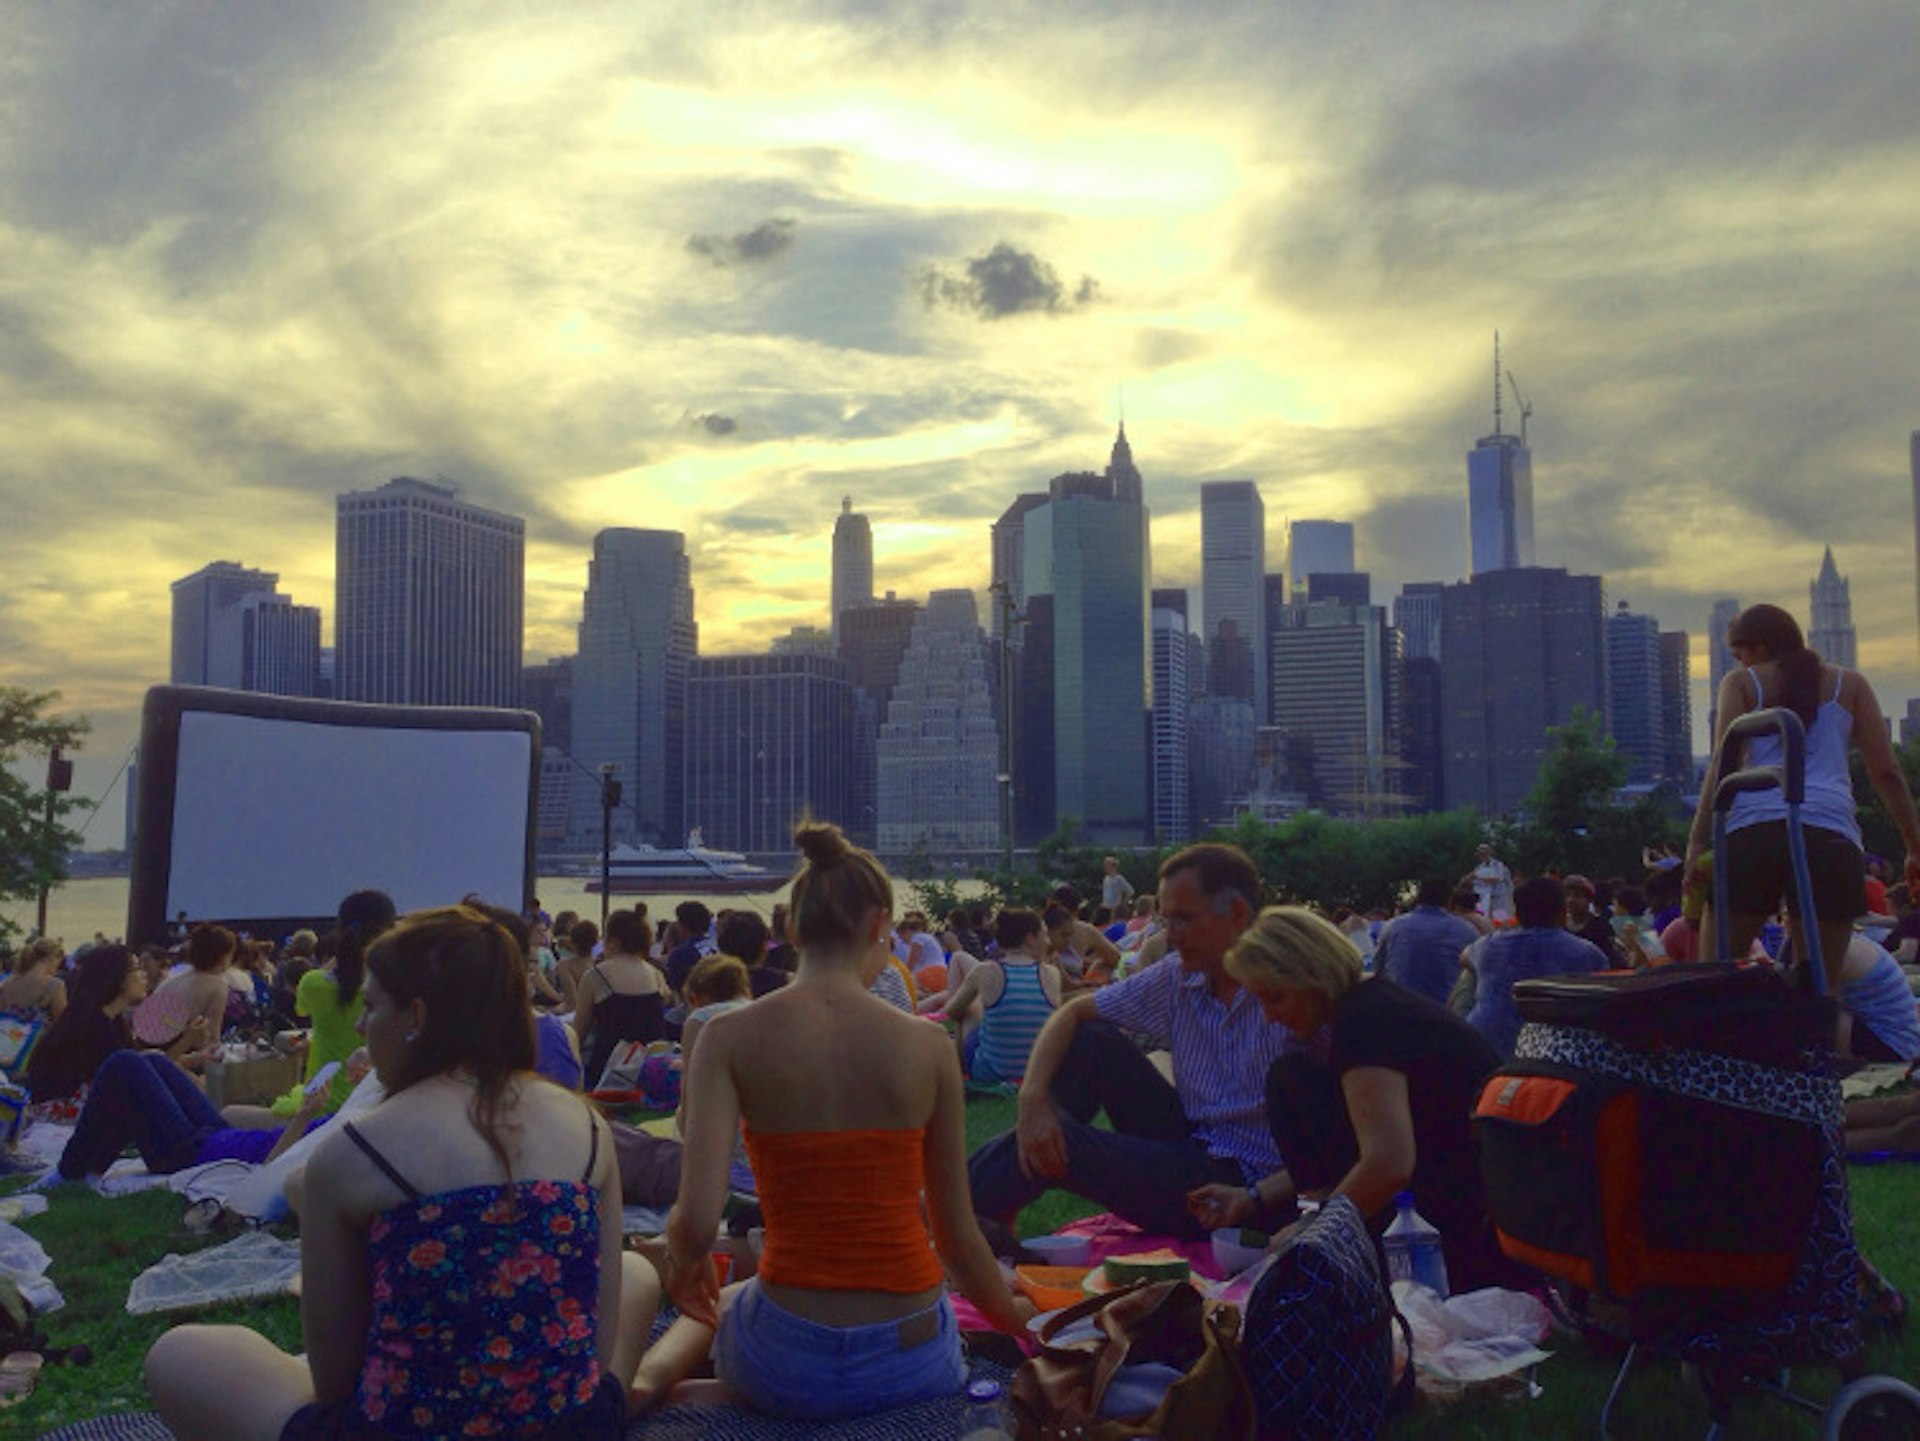 Movie with a view in Brooklyn Bridge Park. Image by Matt Stabile / CC BY 2.0